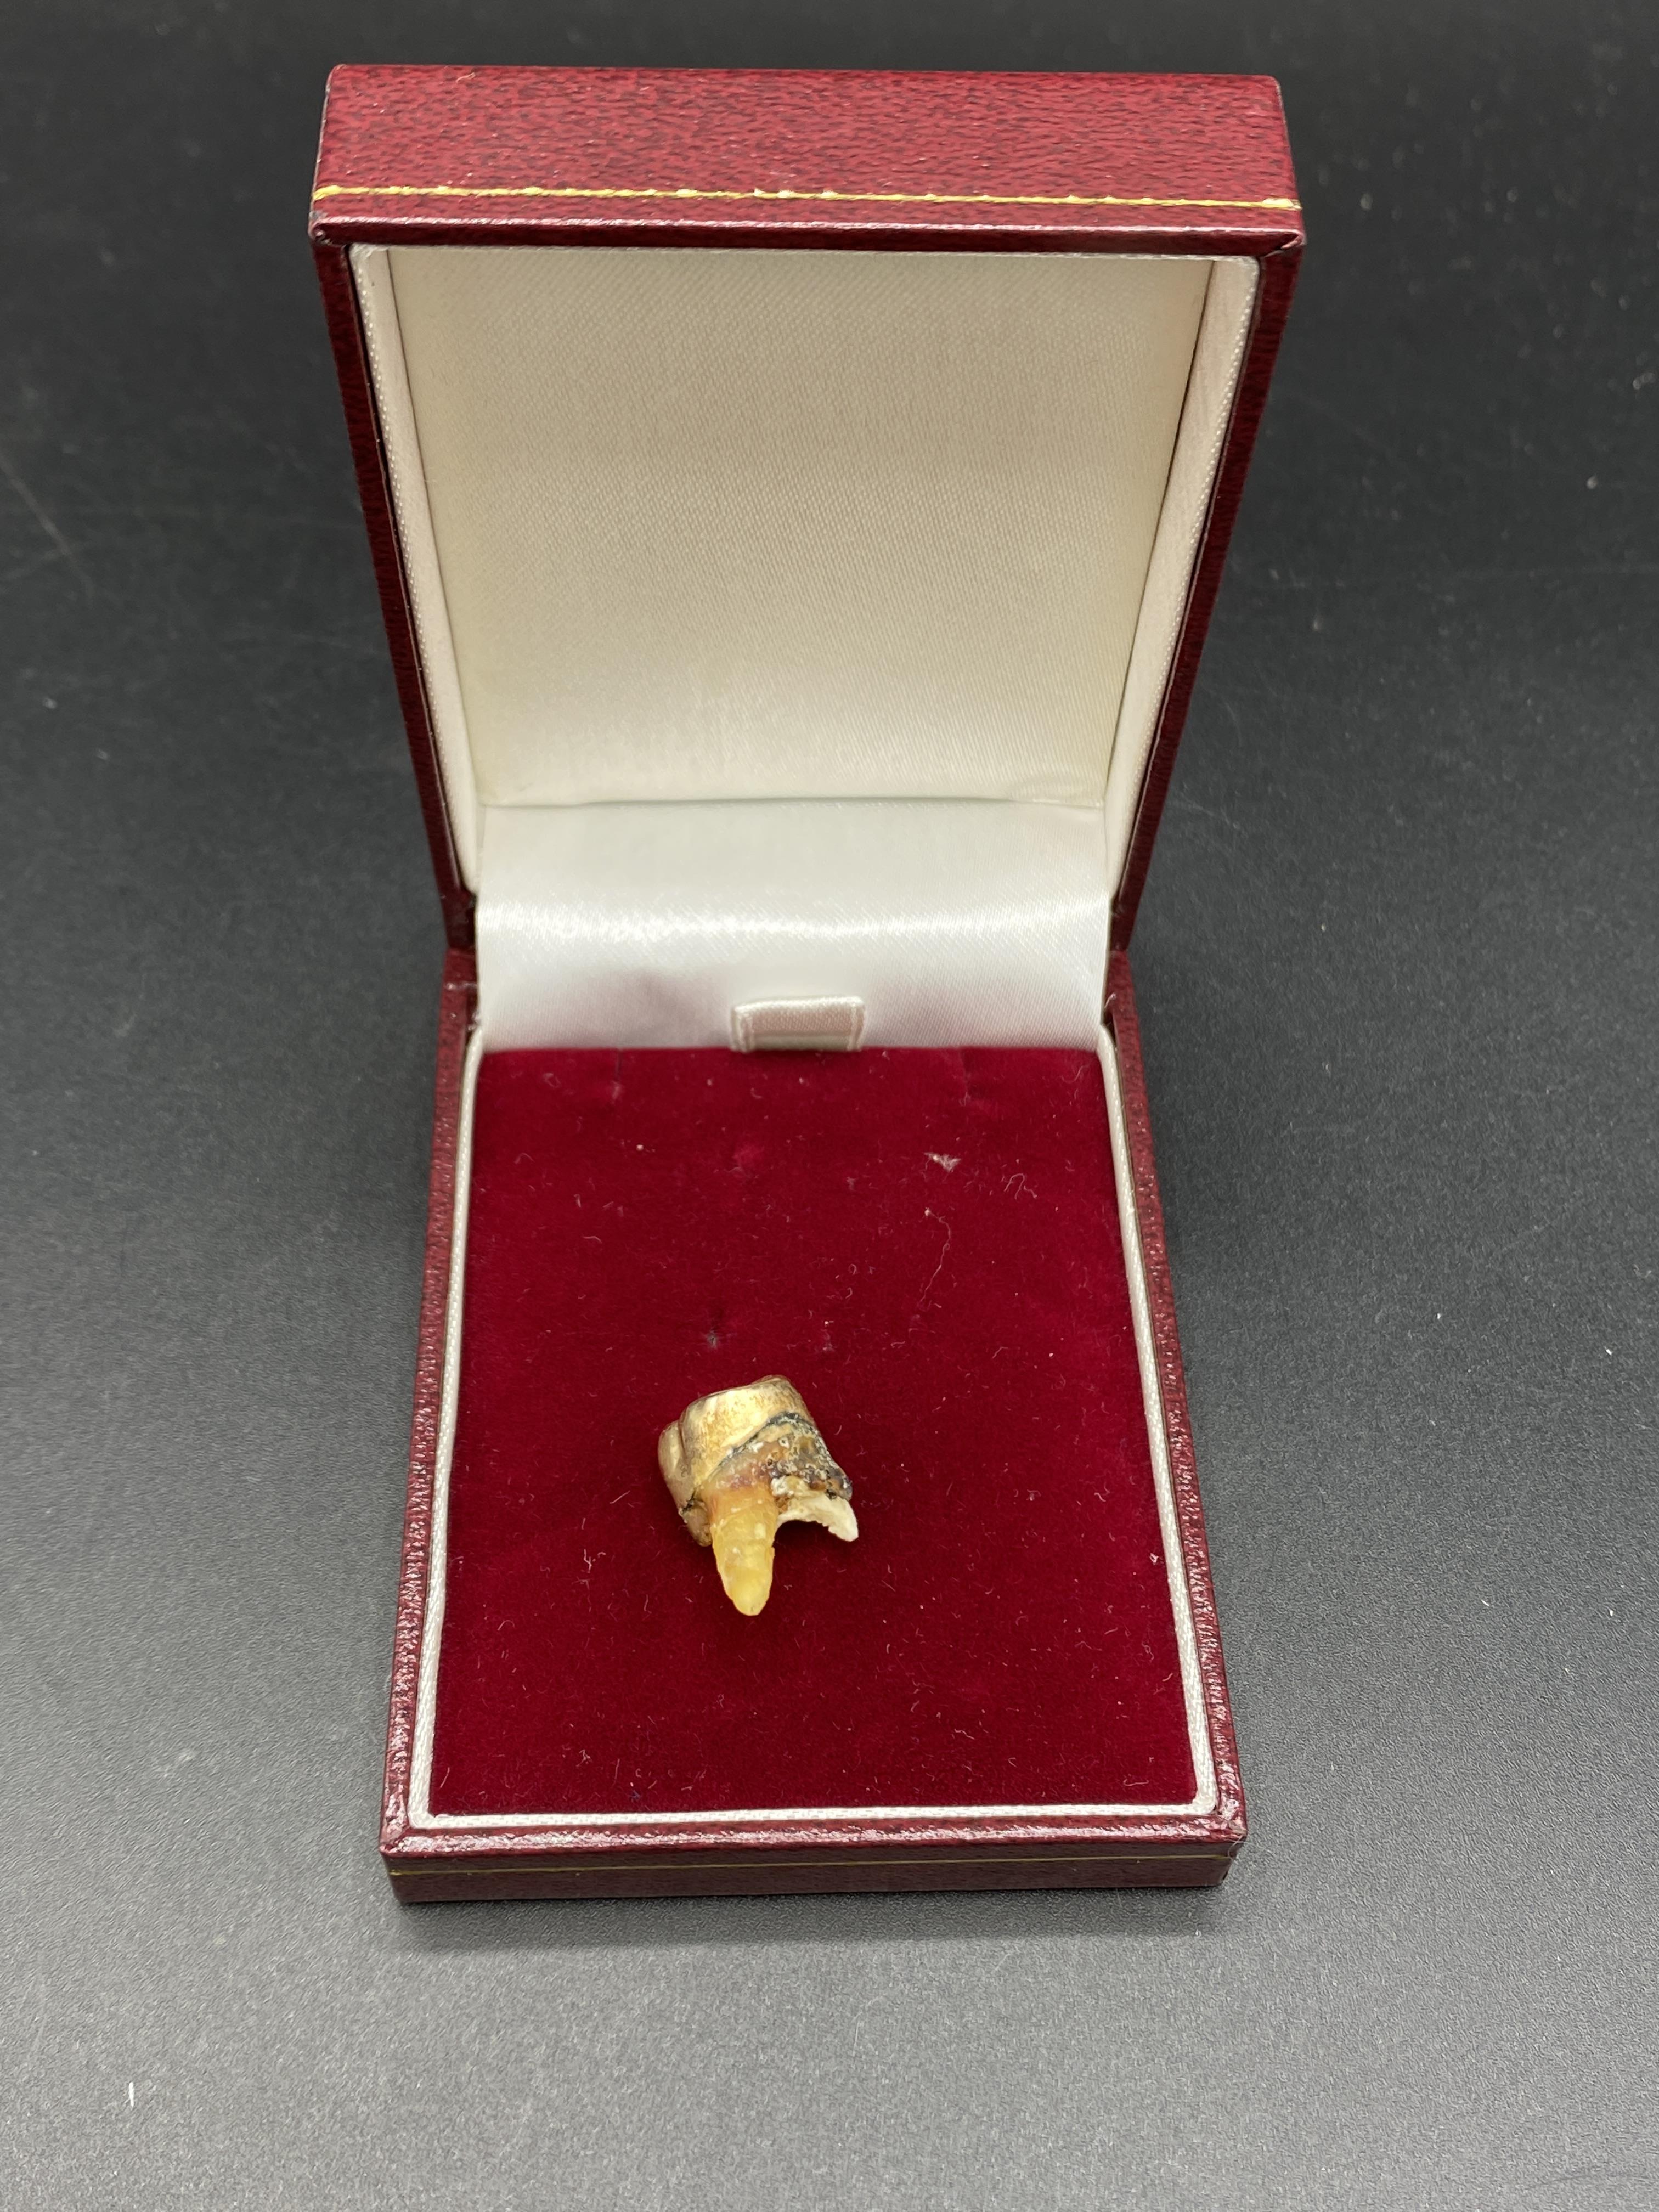 Tooth with gold crown - Image 2 of 2